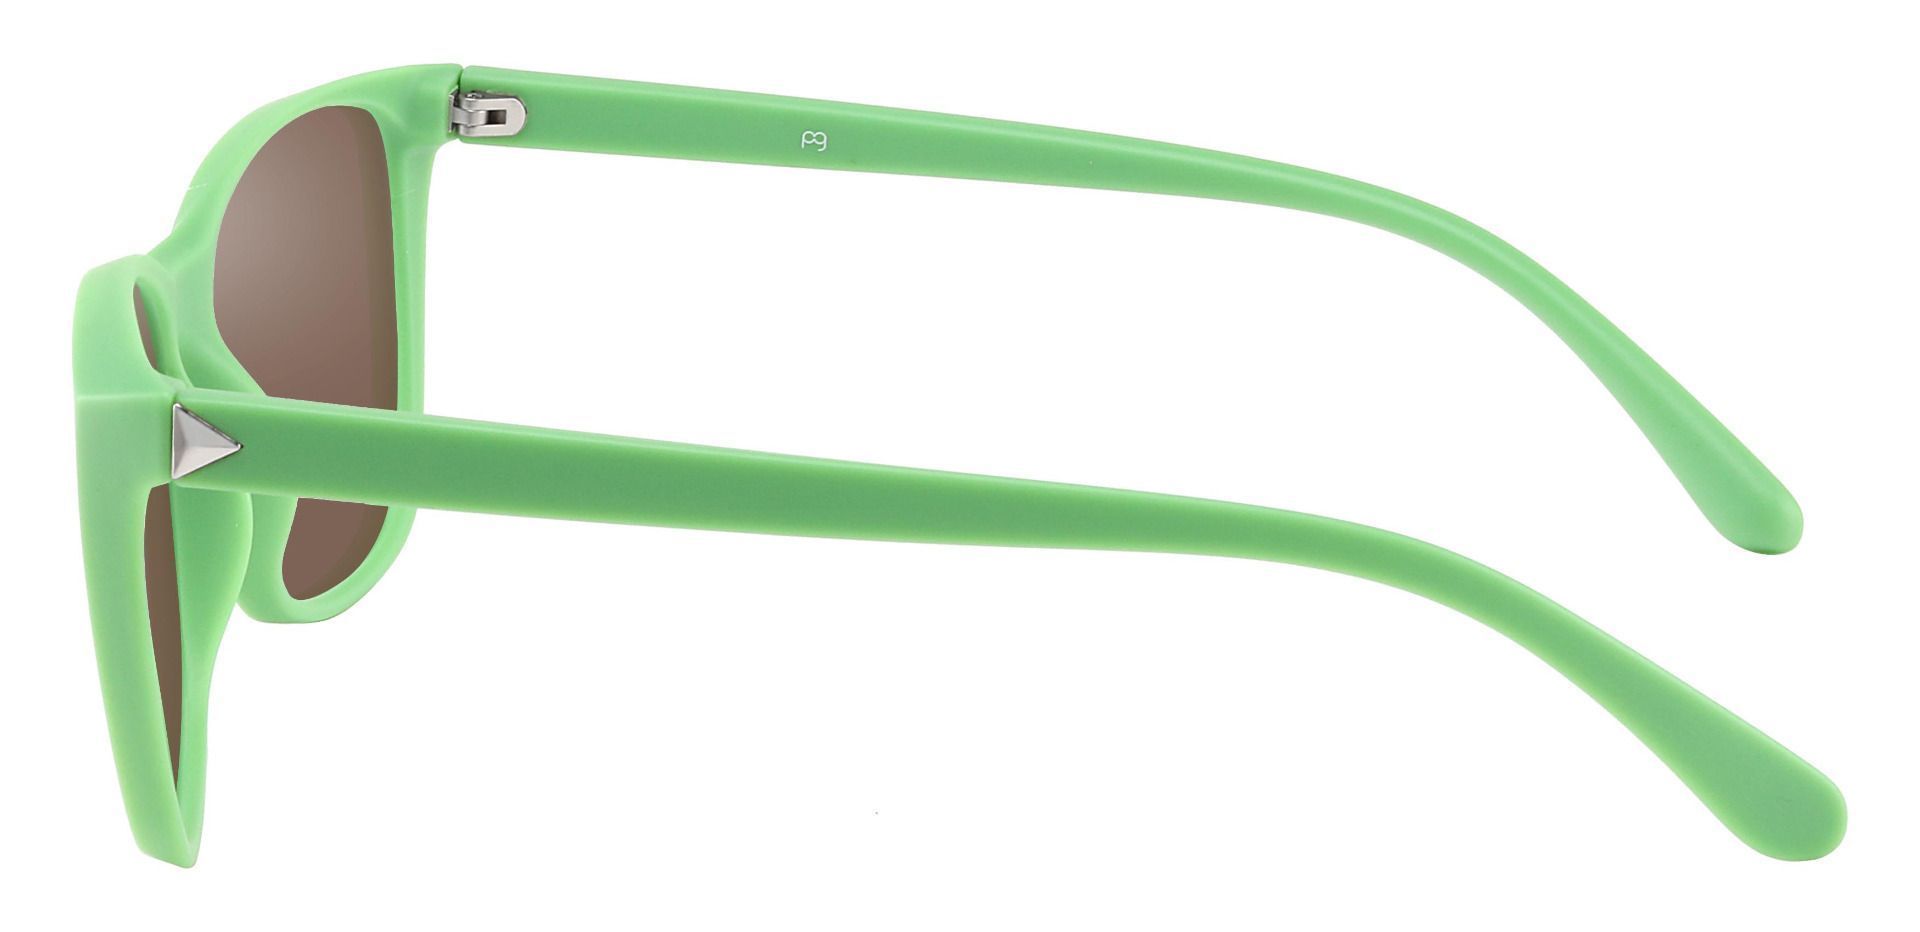 Hickory Square Lined Bifocal Sunglasses - Green Frame With Brown Lenses